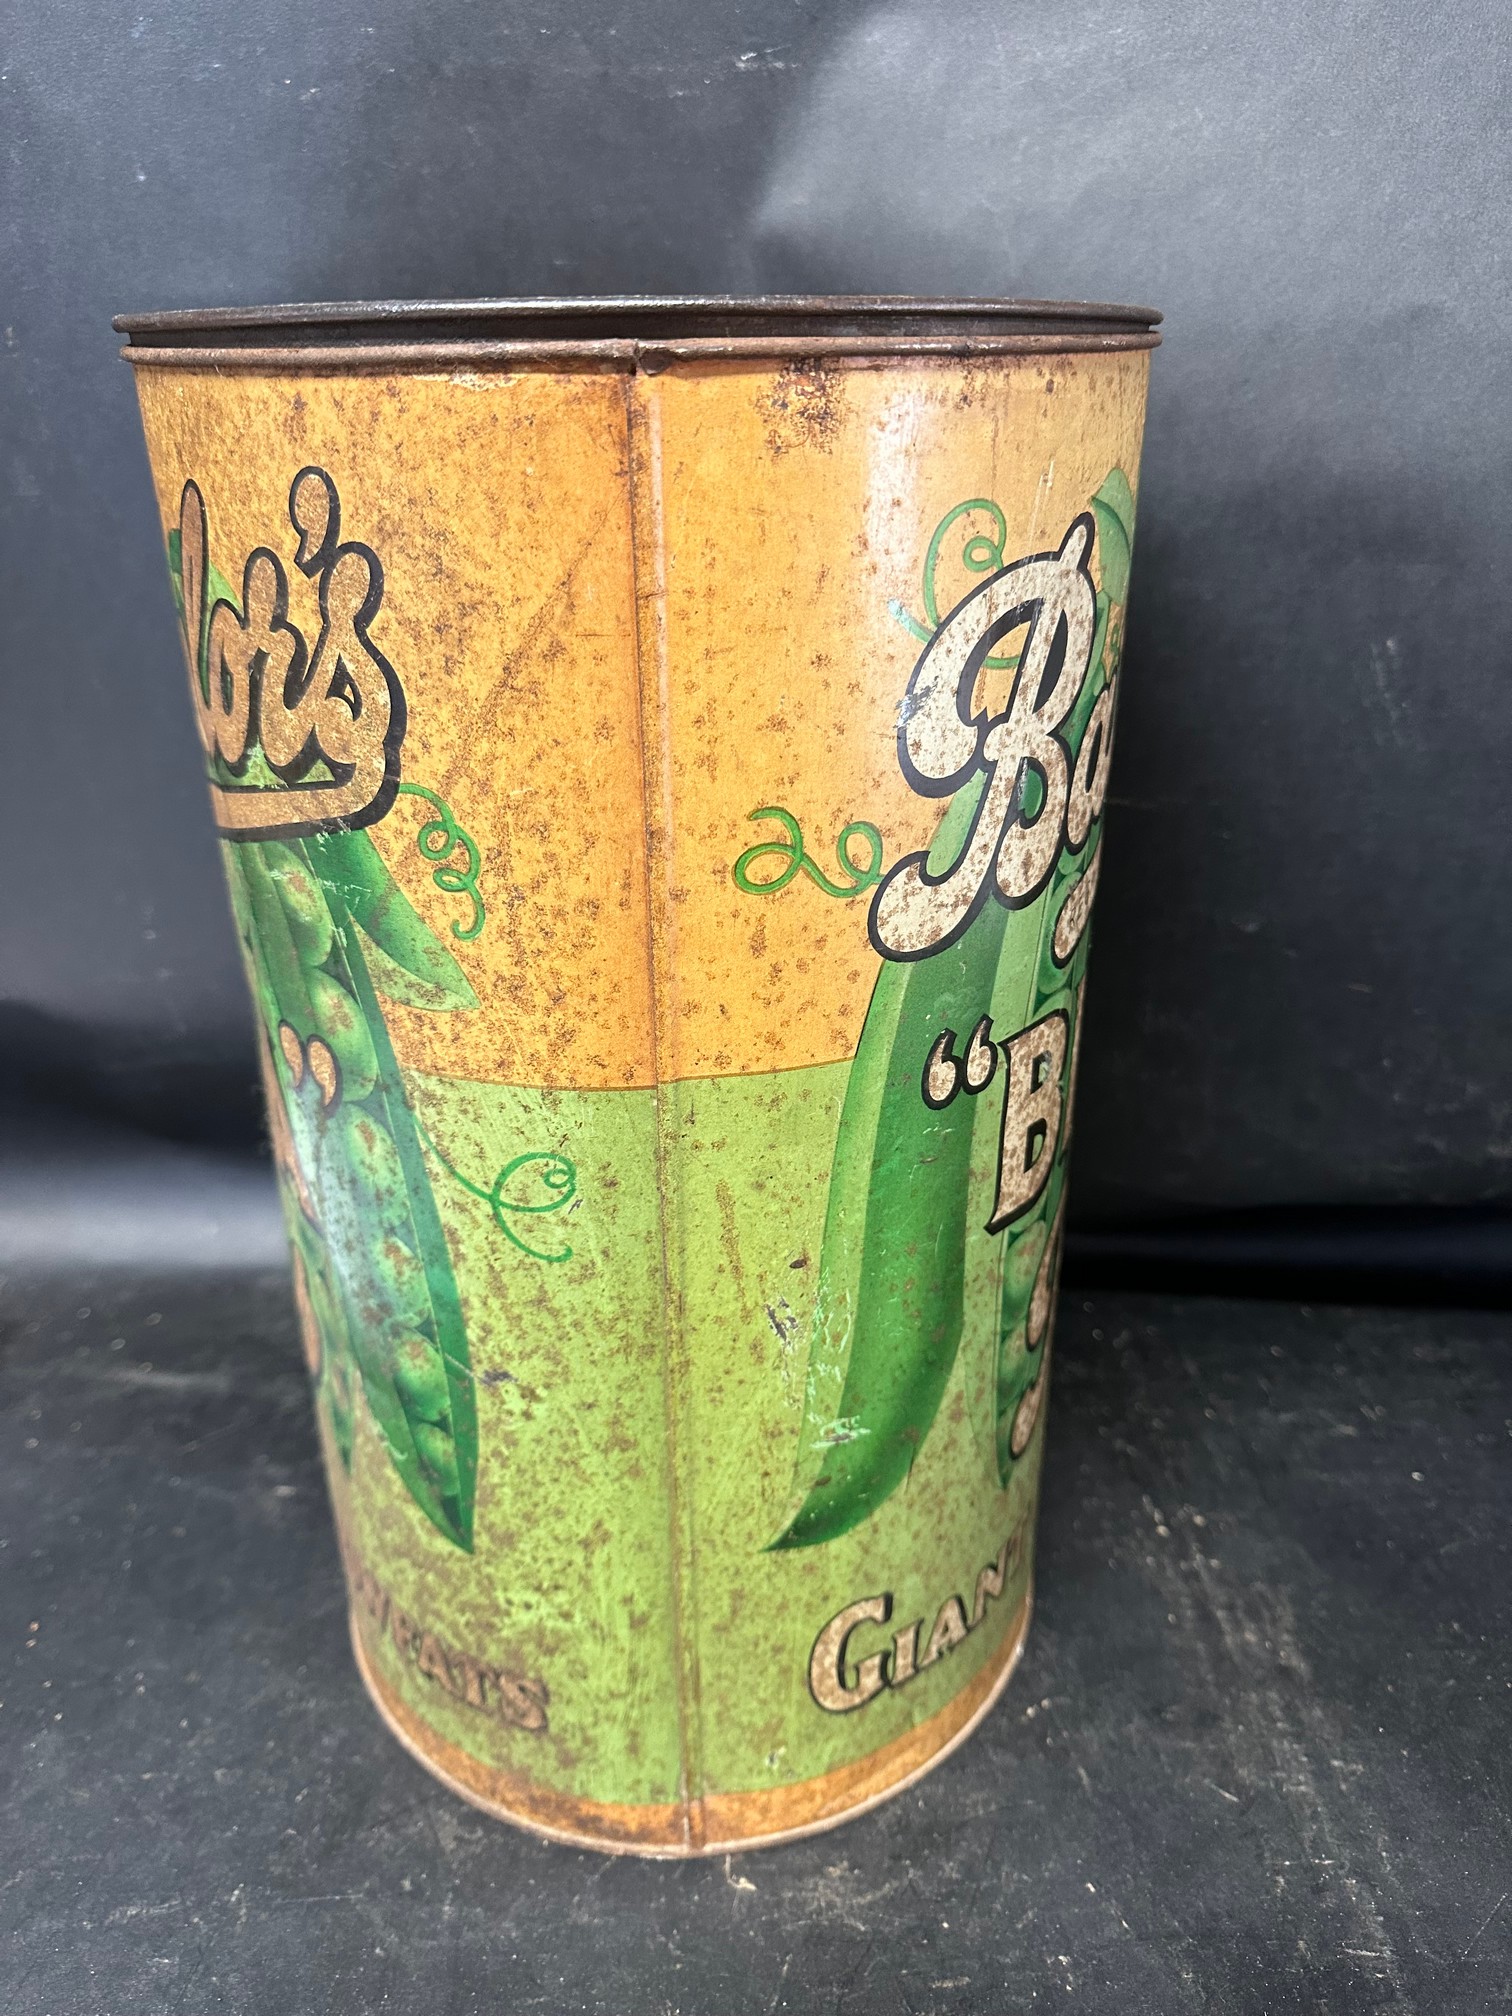 A large Batchelor's "Biggs" Peas Giant Marrowfats advertising display can, 14 1/4" tall. - Image 2 of 5